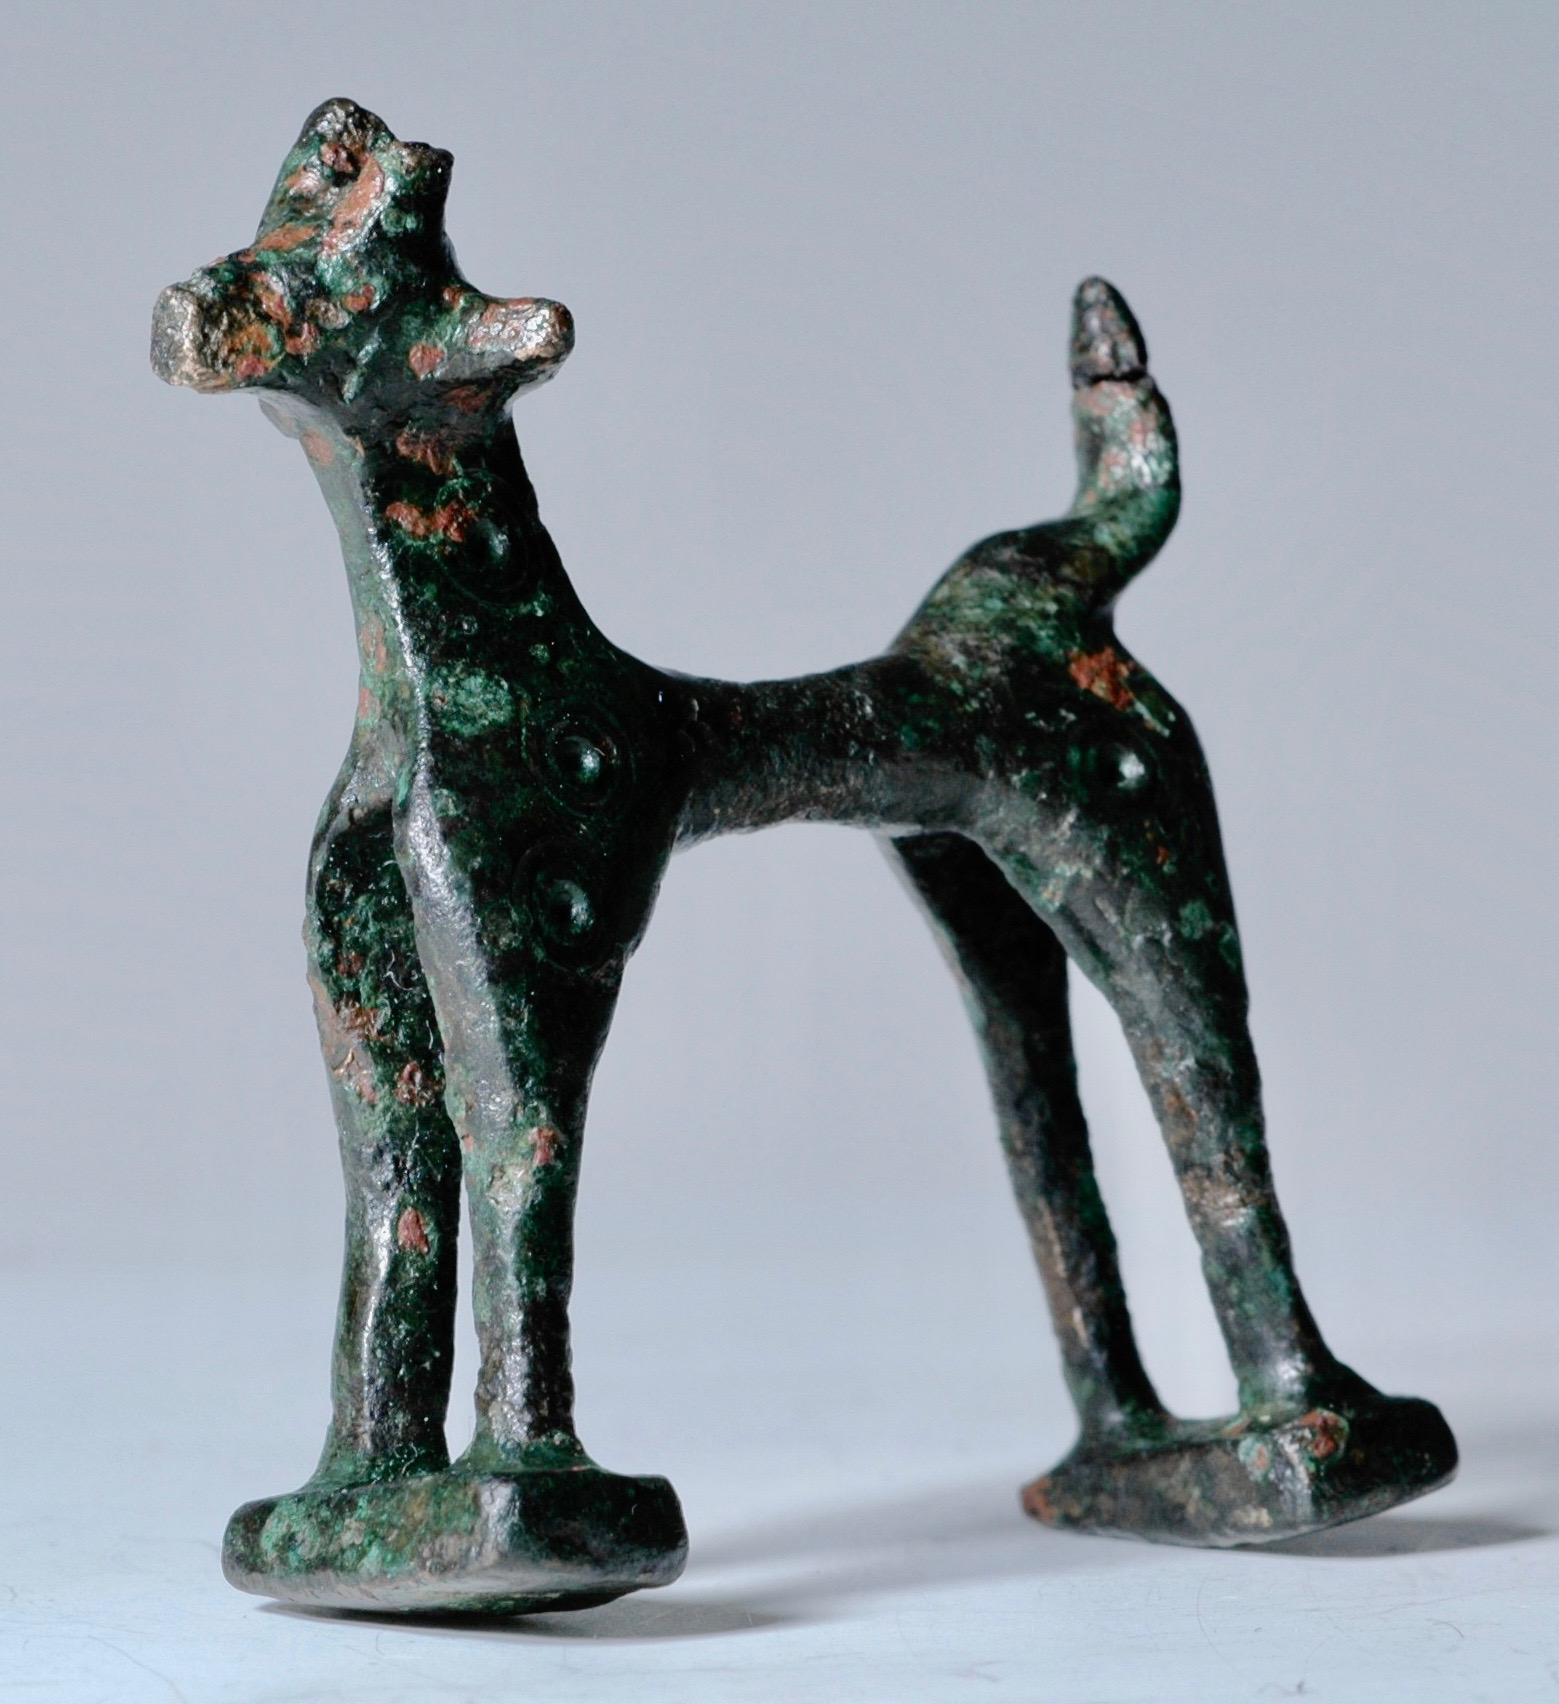 Greek bronze geometric deer decorated with concentric circles, Greece, 8th century BC. This piece was the handle of the cover of a round bronze box called Pyxis. Deer are rare in comparison to horses that where more common. These bronze geometric